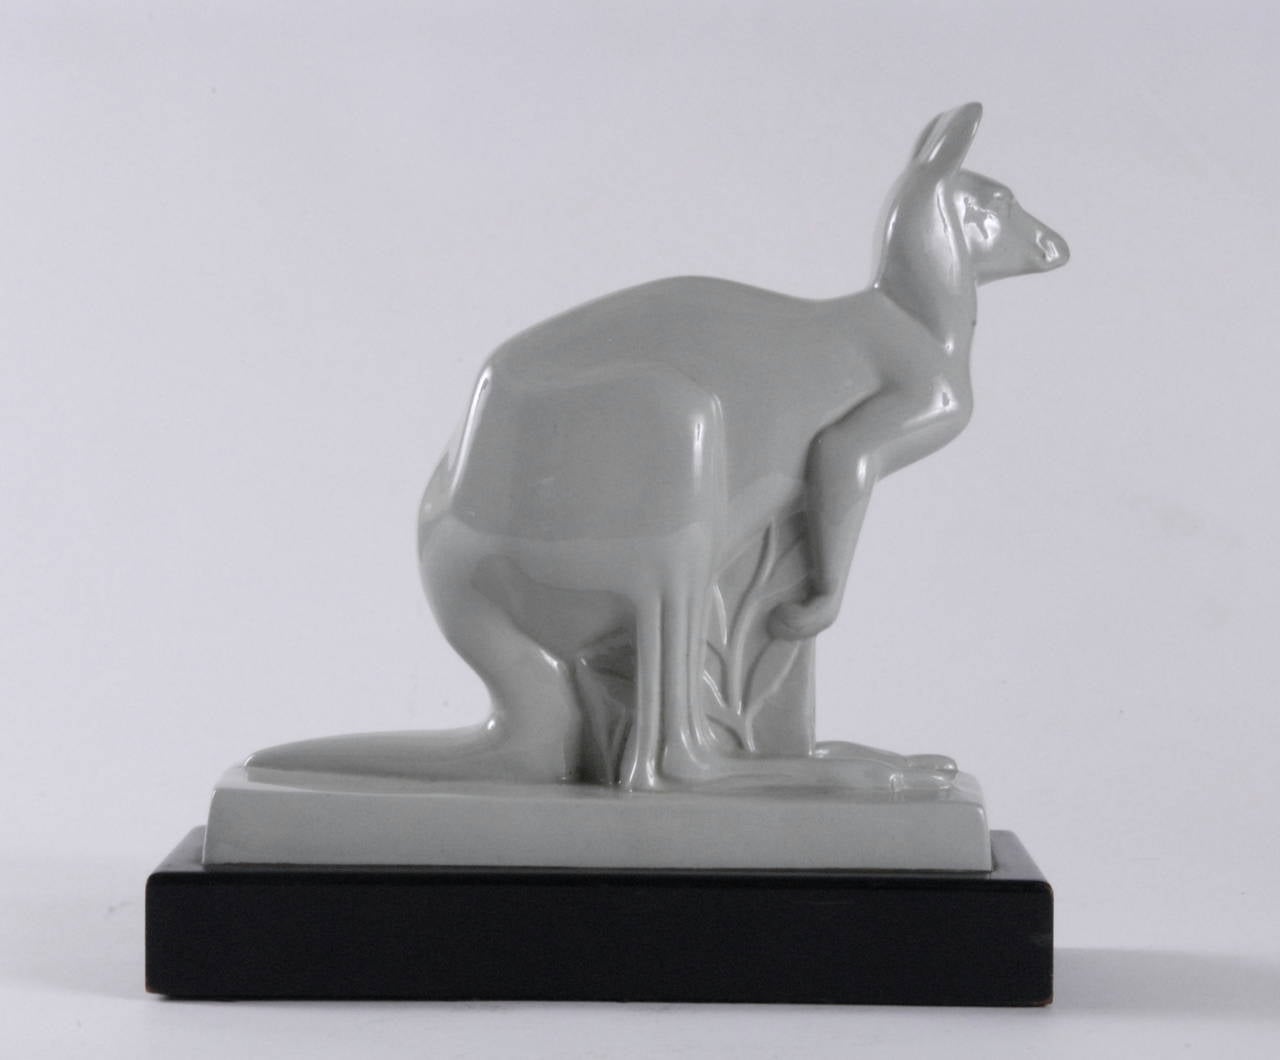 A Wedgwood kangaroo in celadon color designed by John Skeaping, circa 1930.
Mounted on its original black painted timber base and signed in the clay on the rear of the ceramic plinth, finished in a gloss celadon glaze.
Some areas with minor